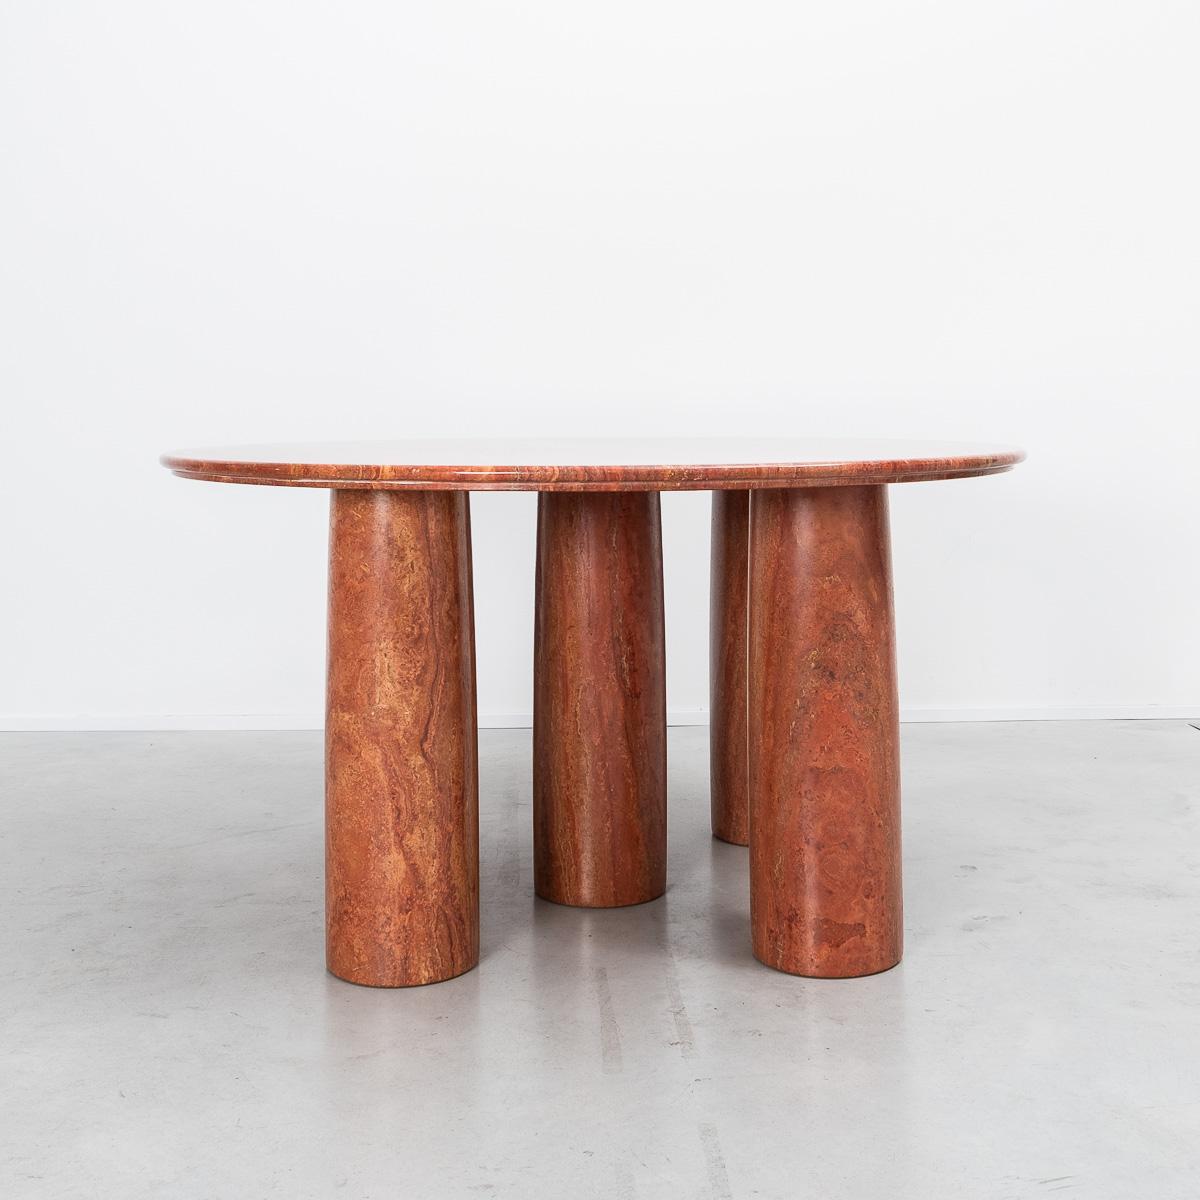 A large round Il Colonnato table, designed by Milanese architect Mario Bellini. The table is a sought after piece, perhaps due to the monumental presence it commands within a space. Minimal in design, with five column legs, it is constructed